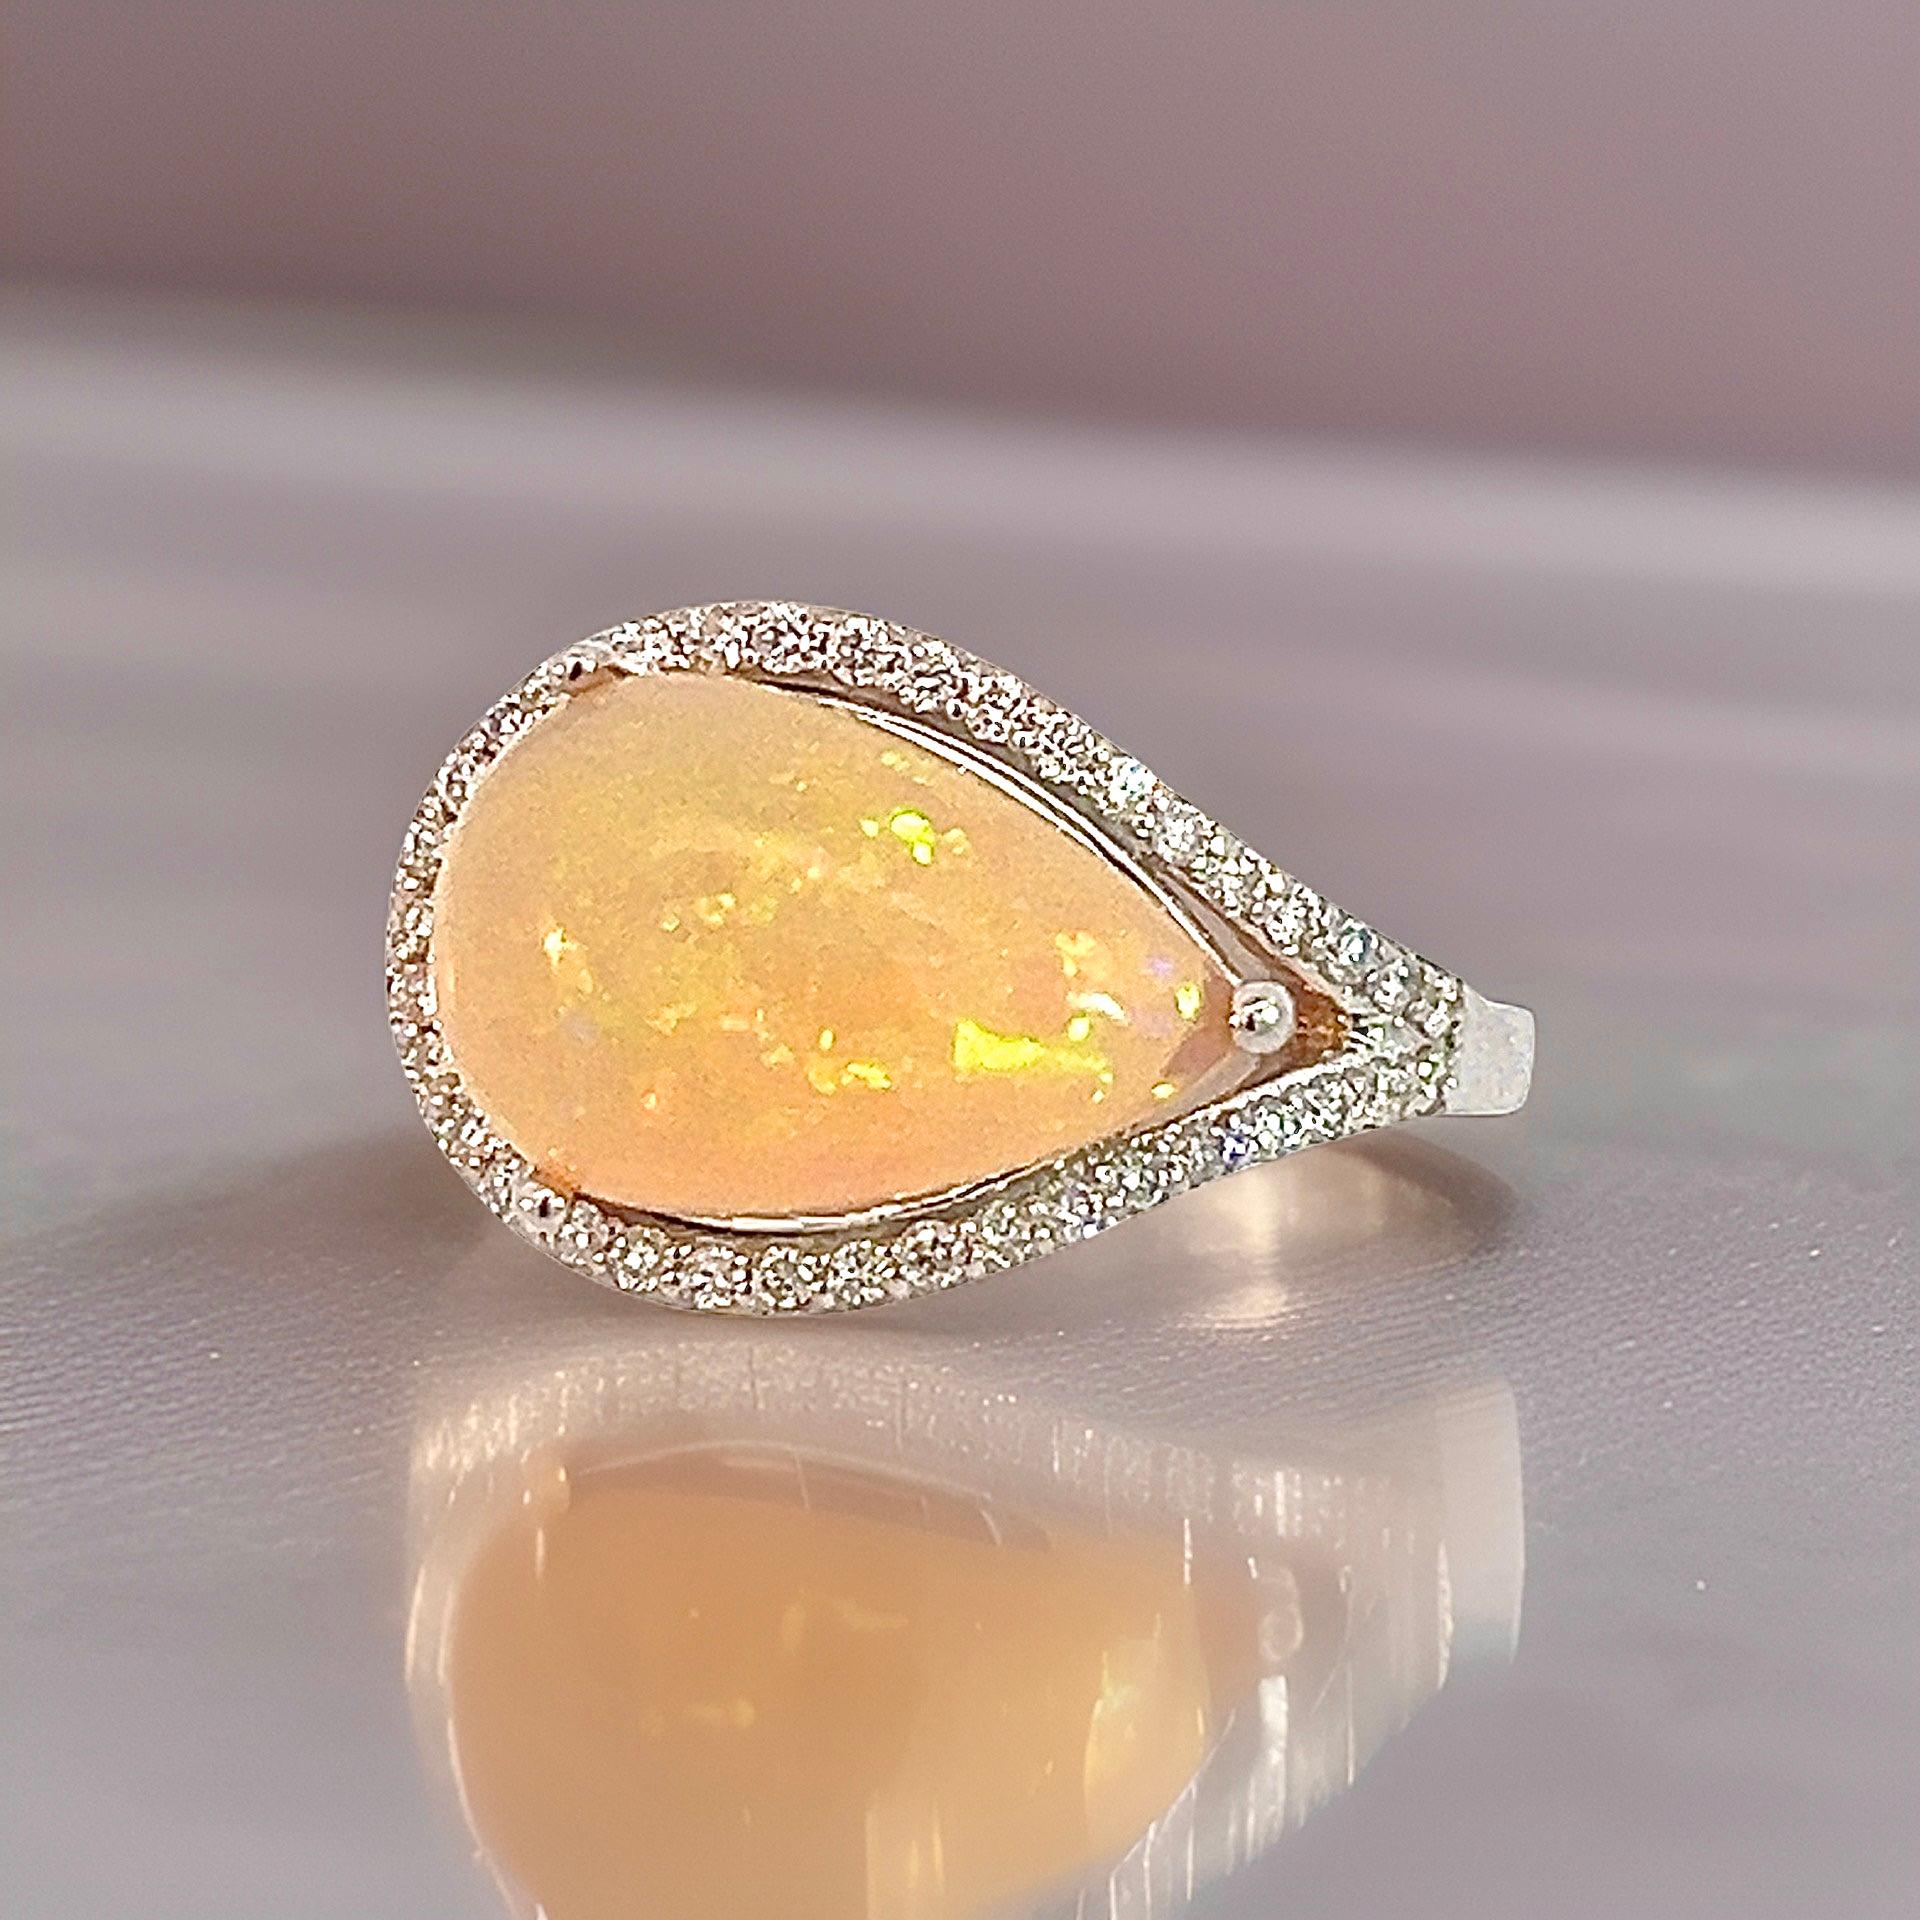 Natural Opal Diamond Ring 6.75 14k W Gold 4 TCW Certified For Sale 5